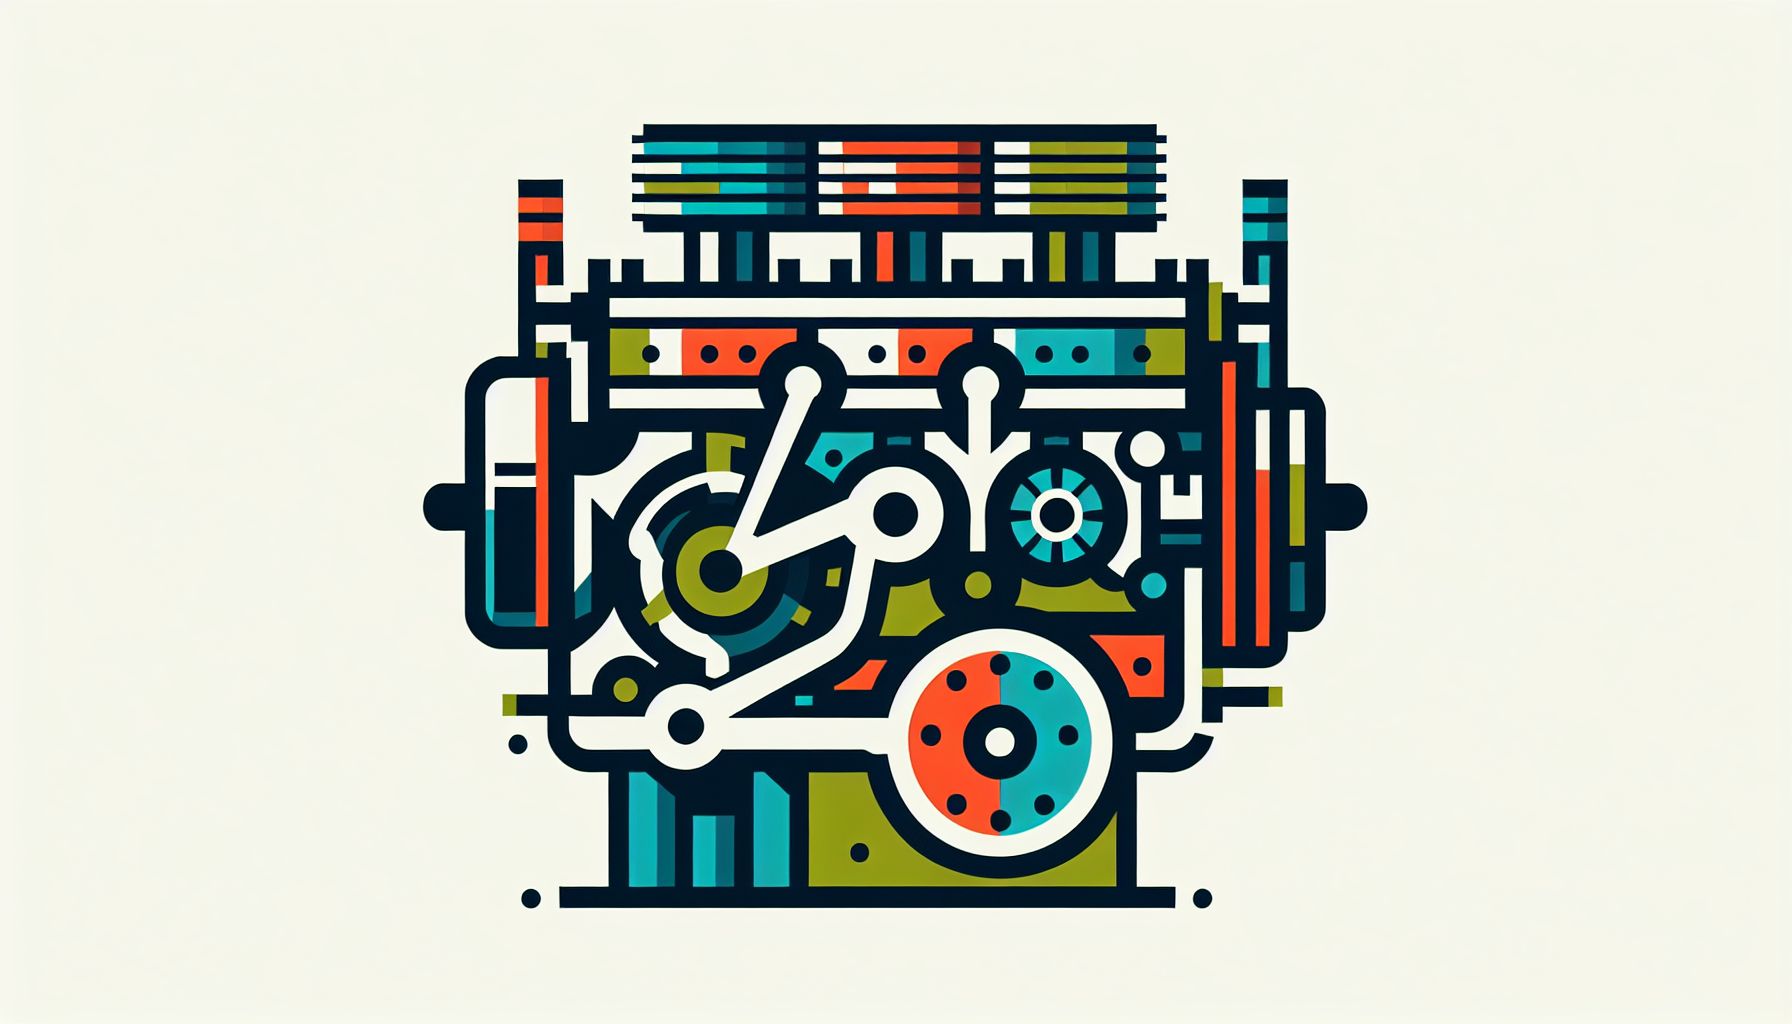 Engine in flat illustration style and white background, red #f47574, green #88c7a8, yellow #fcc44b, and blue #645bc8 colors.